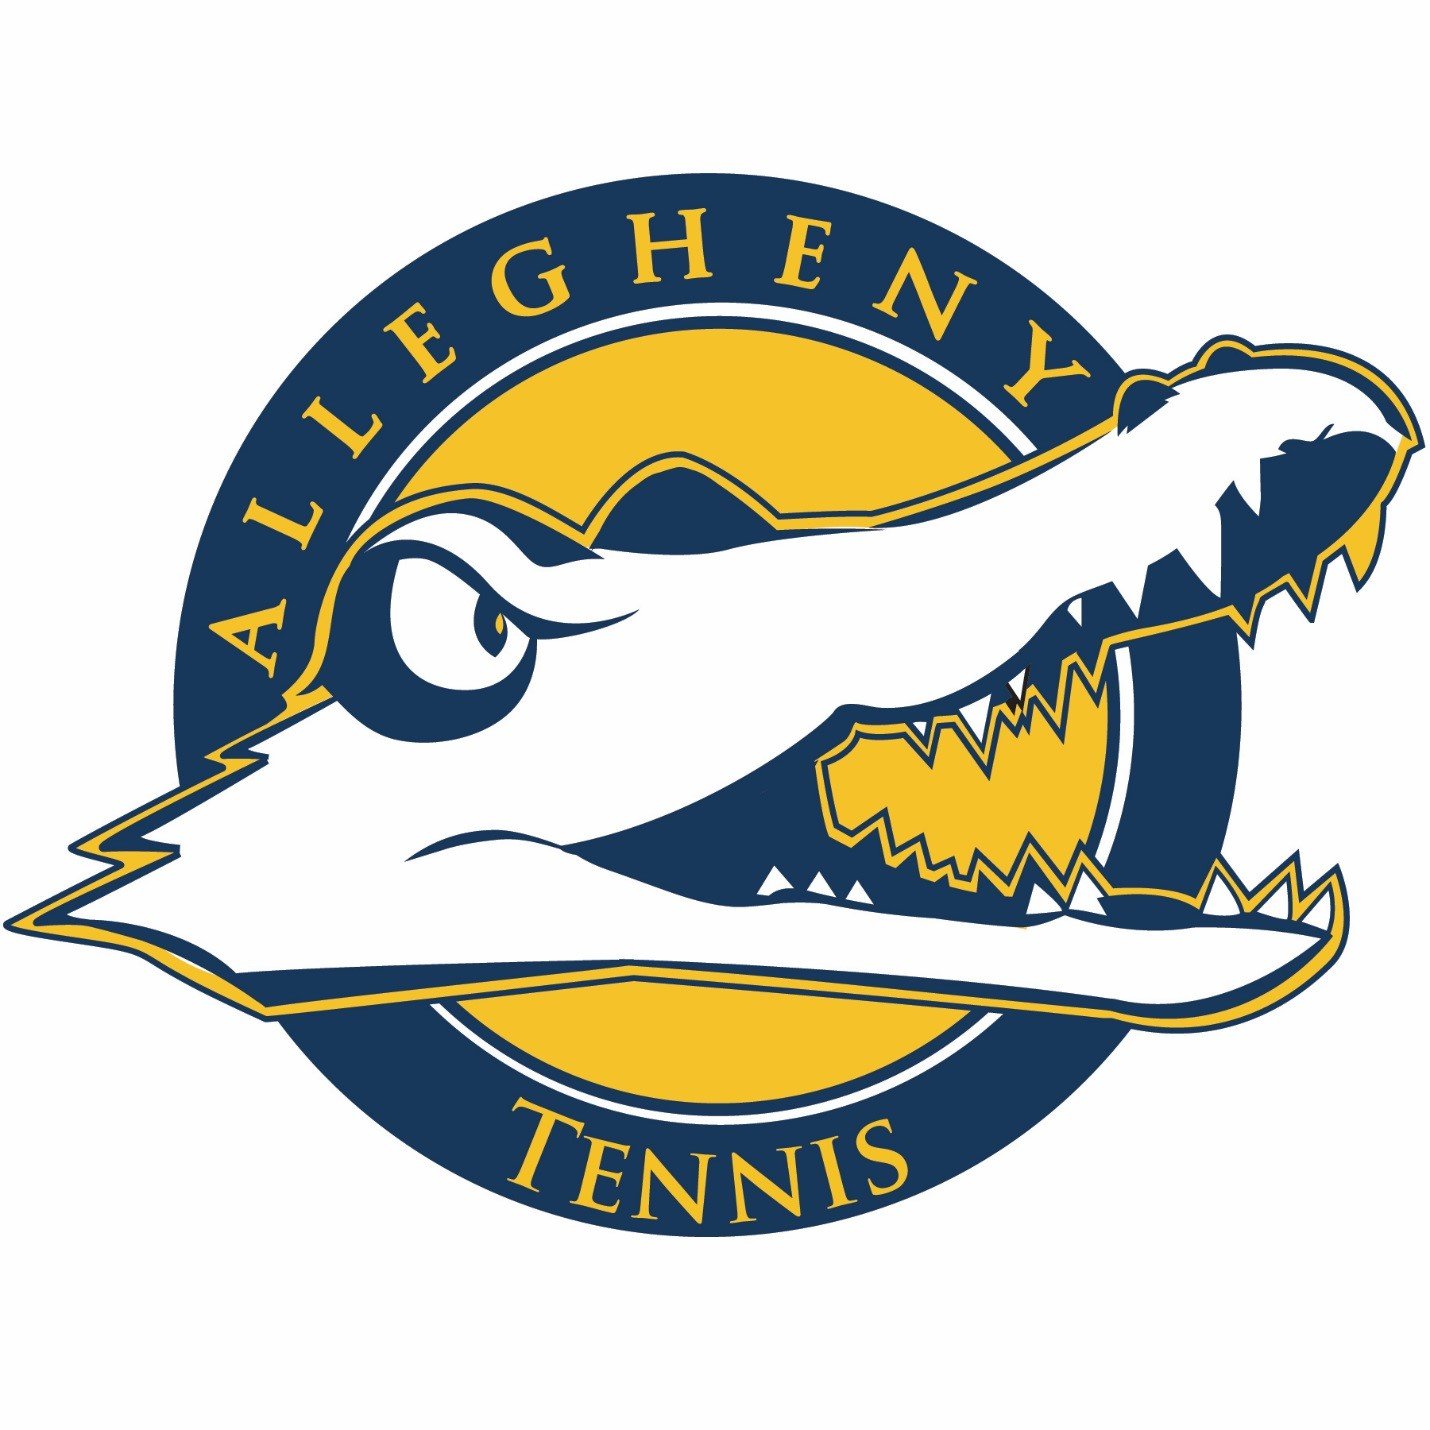 The Allegheny College tennis program competes in the North Coast Athletic Conference-NCAA DIII. Allegheny College is among one of the oldest colleges in the US.